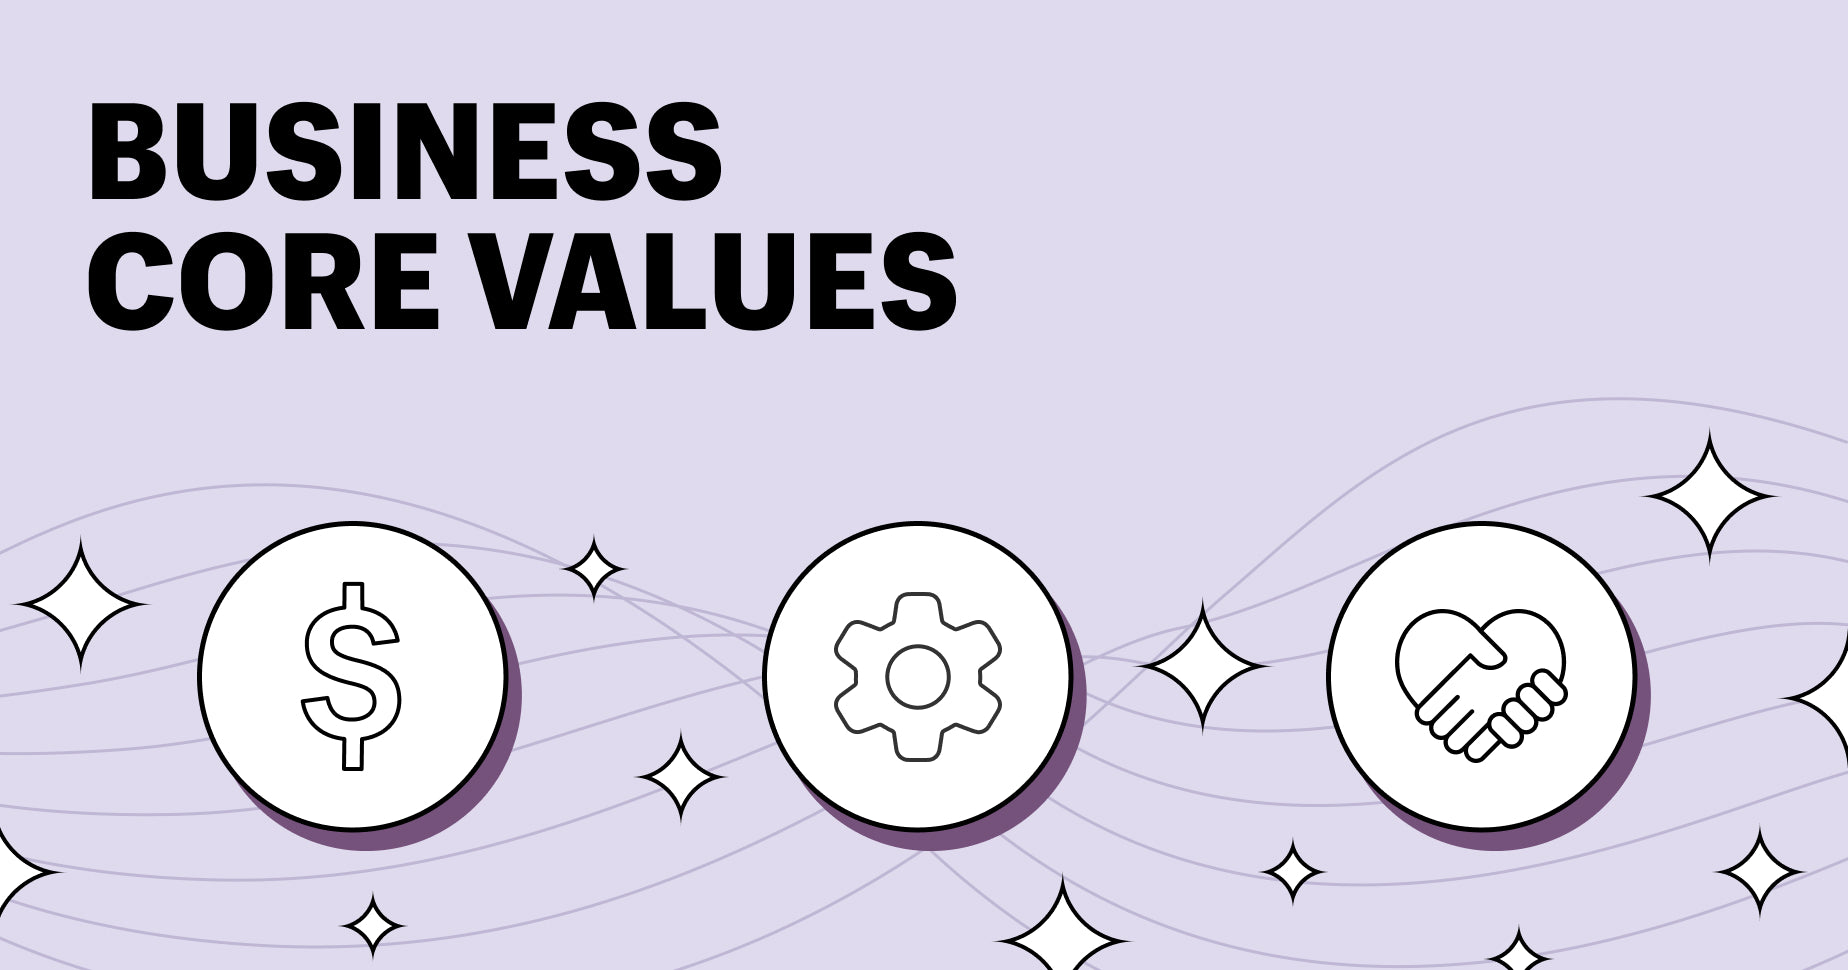 Light purple background with text that says "business core values" alongside white abstract vector icons  